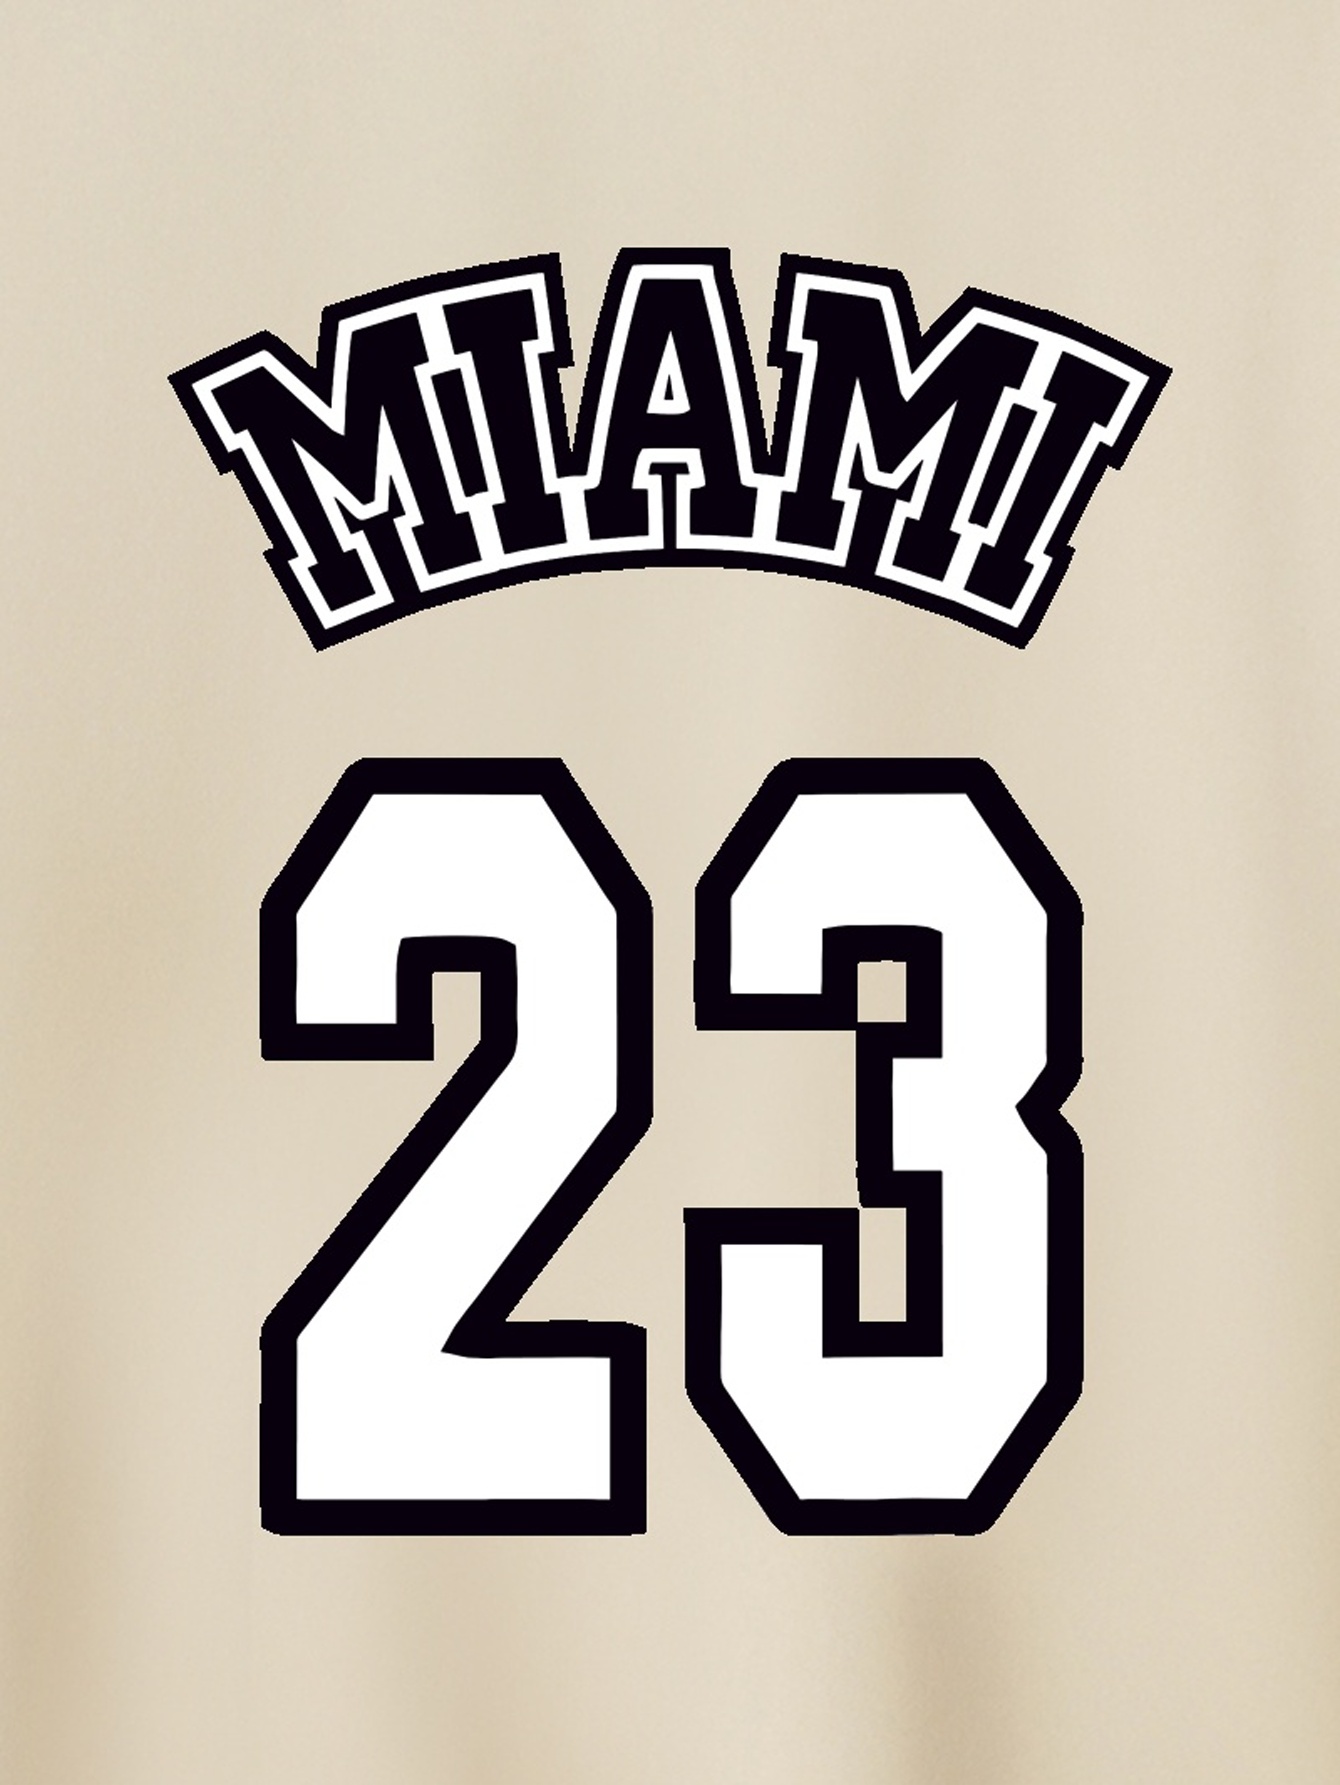 Men's Trend ''miami'' Letter Graphic Short Sleeve T Shirt And